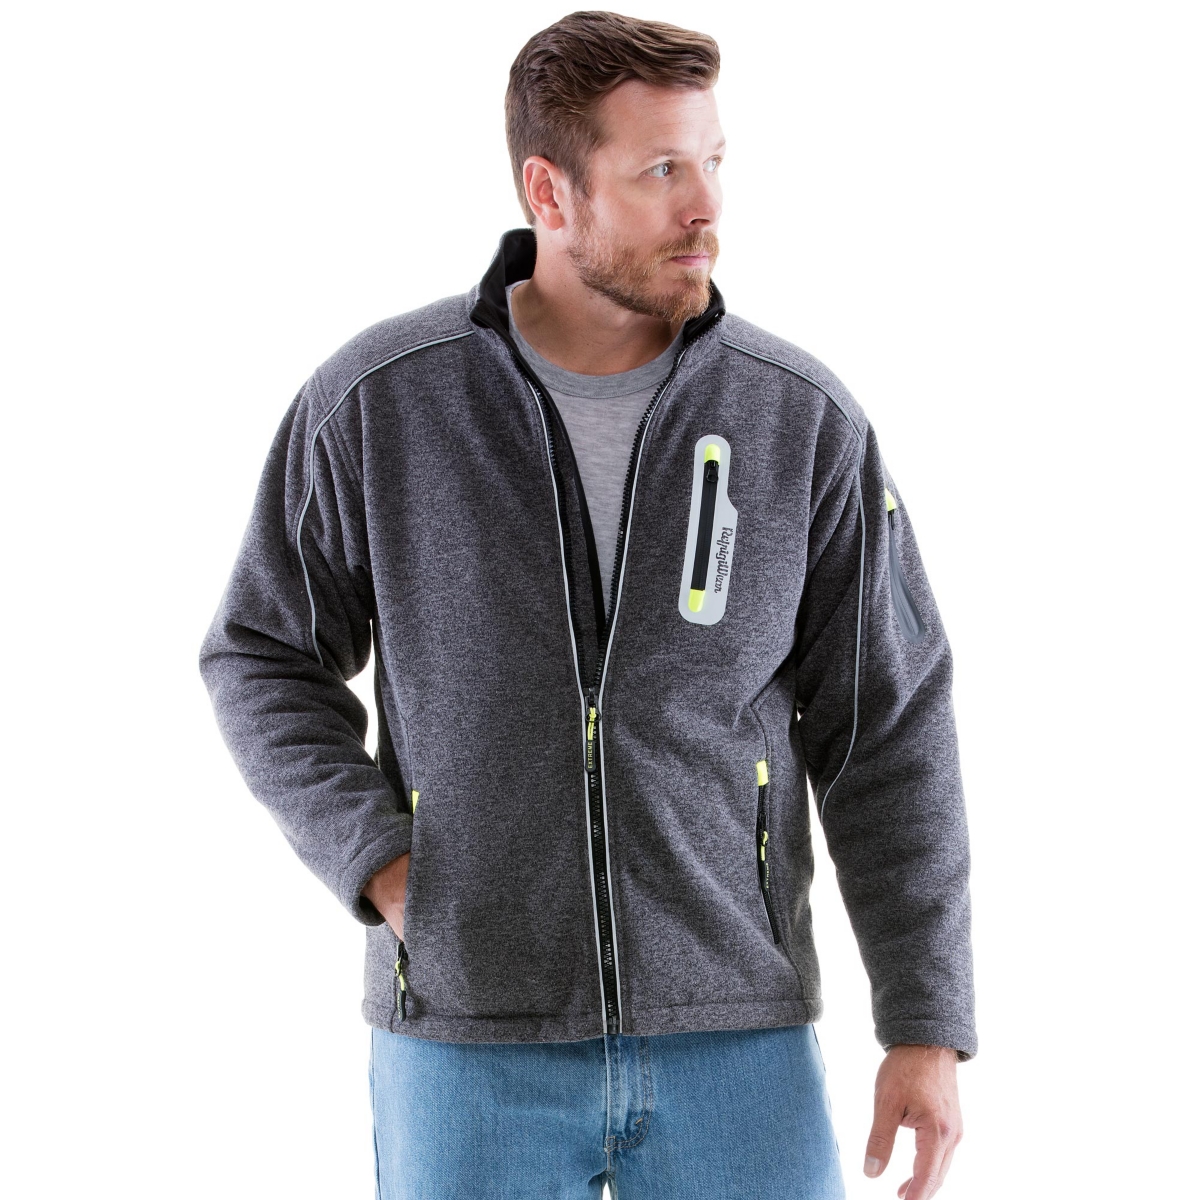 Big & Tall Warm Fleece Lined Extreme Sweater Jacket with Reflective Piping - Grey